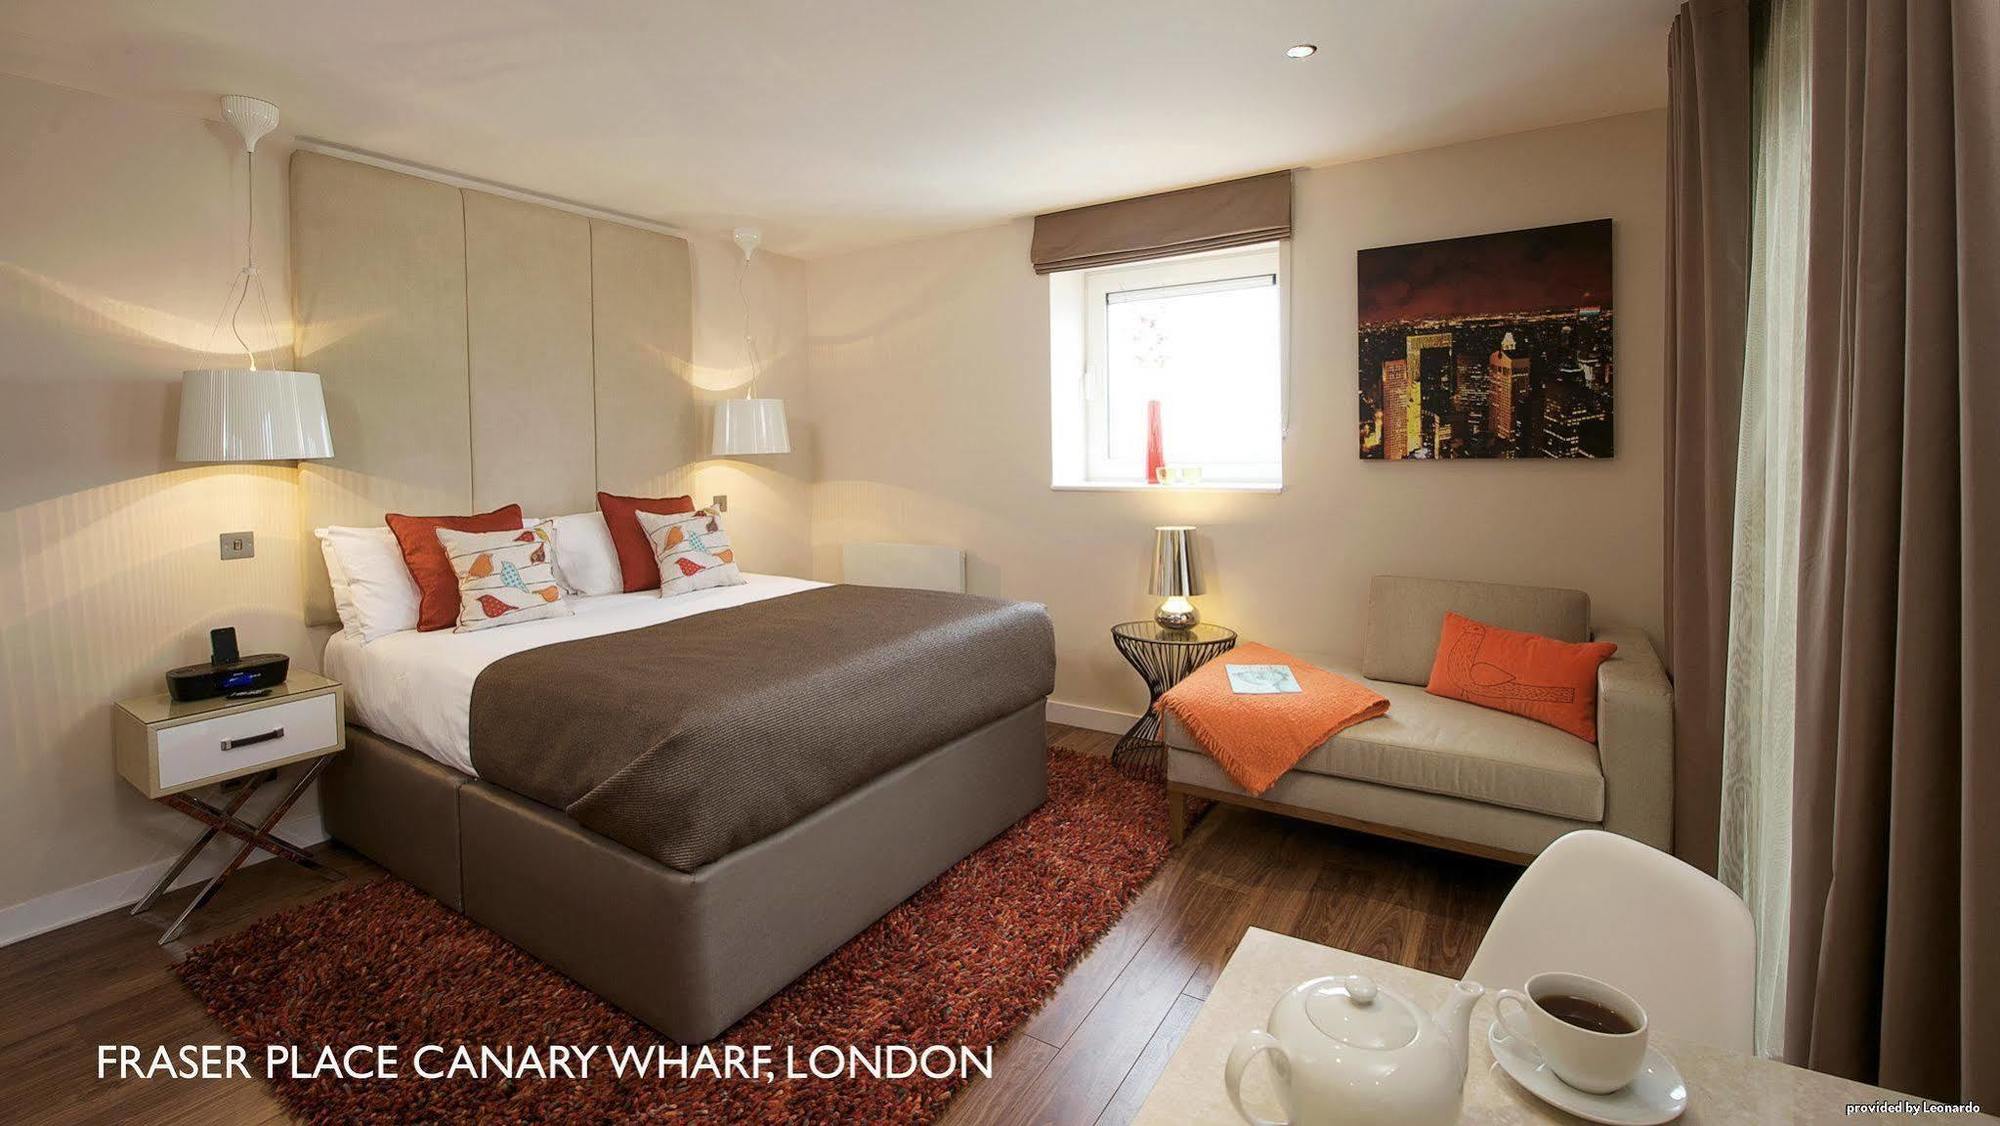 Fraser Place Canary Wharf Londen Kamer foto